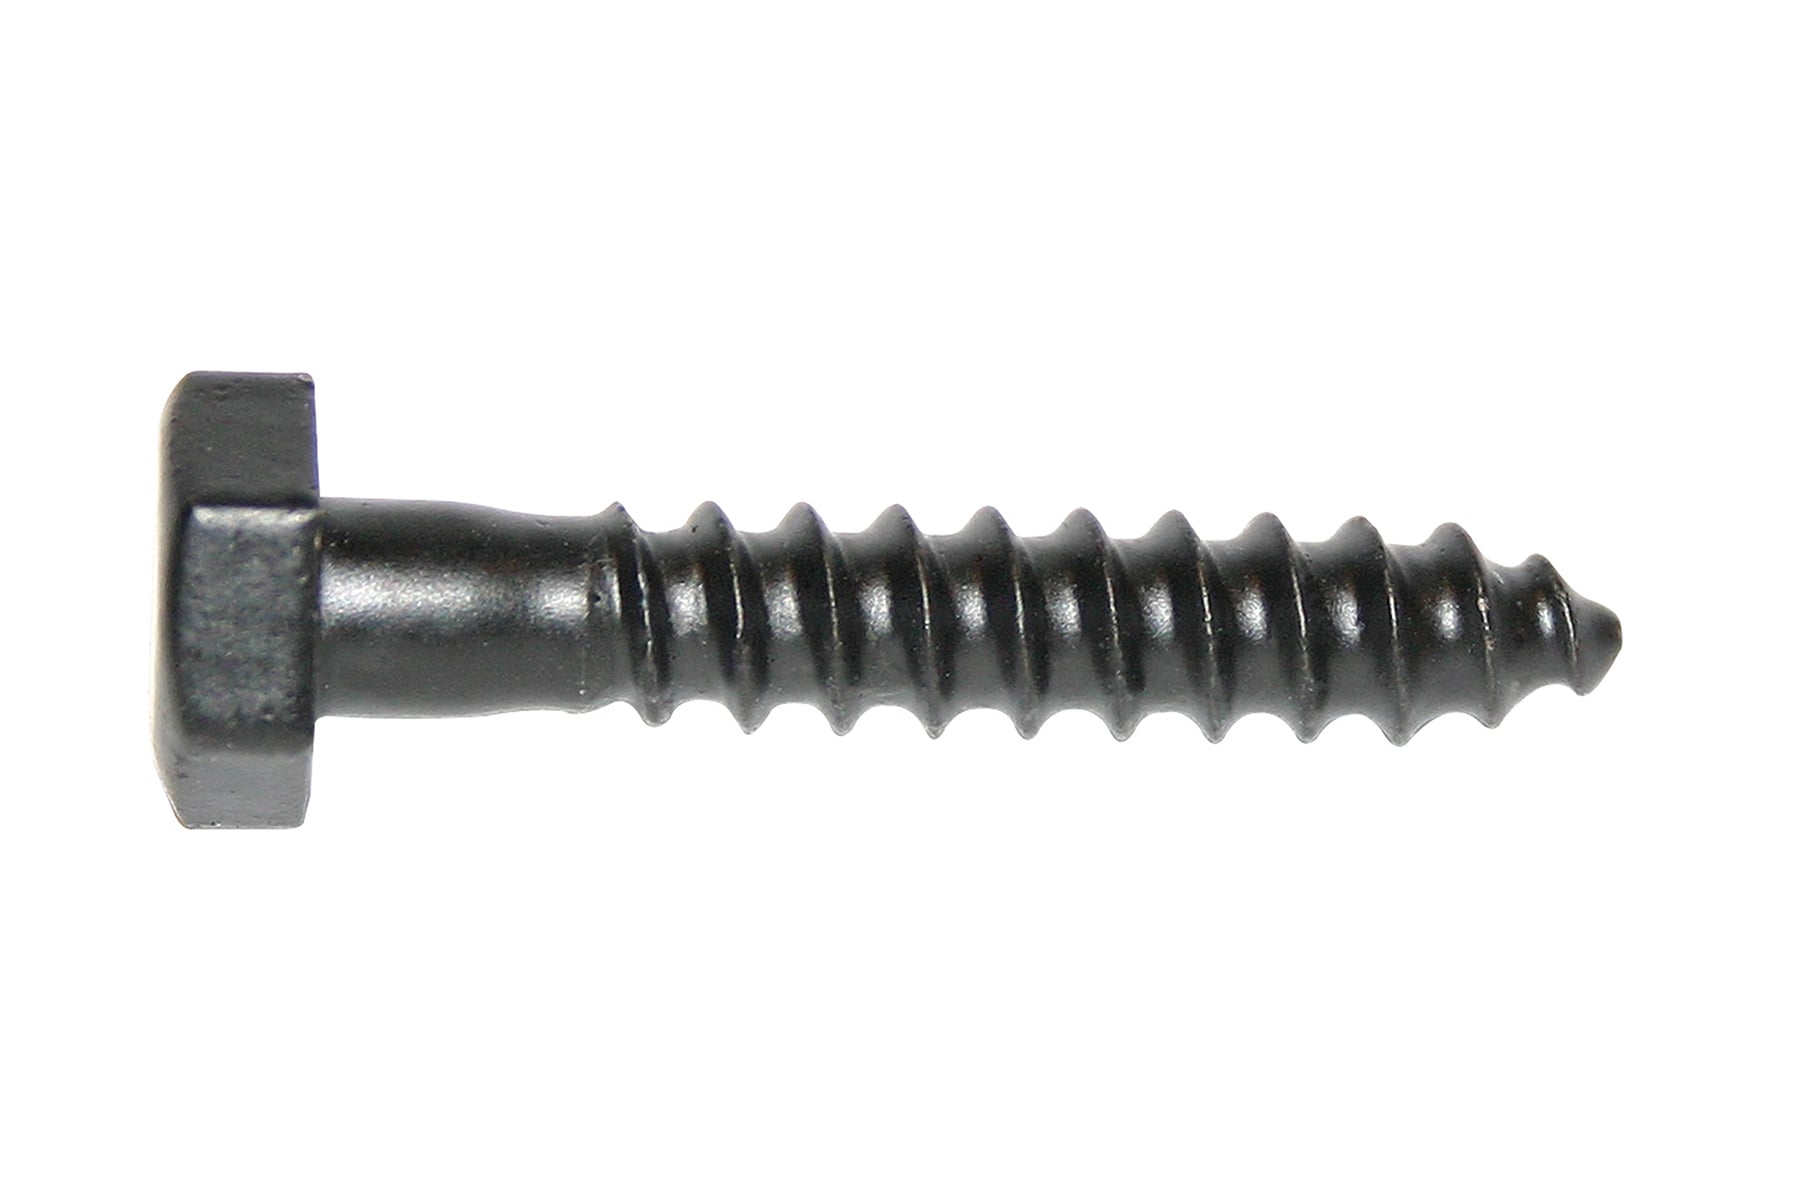 3/4" x 5-1/2" Galvanized Lag Screw Bolts Hex Head Timber Bolts Wood Screws 60 Details about    